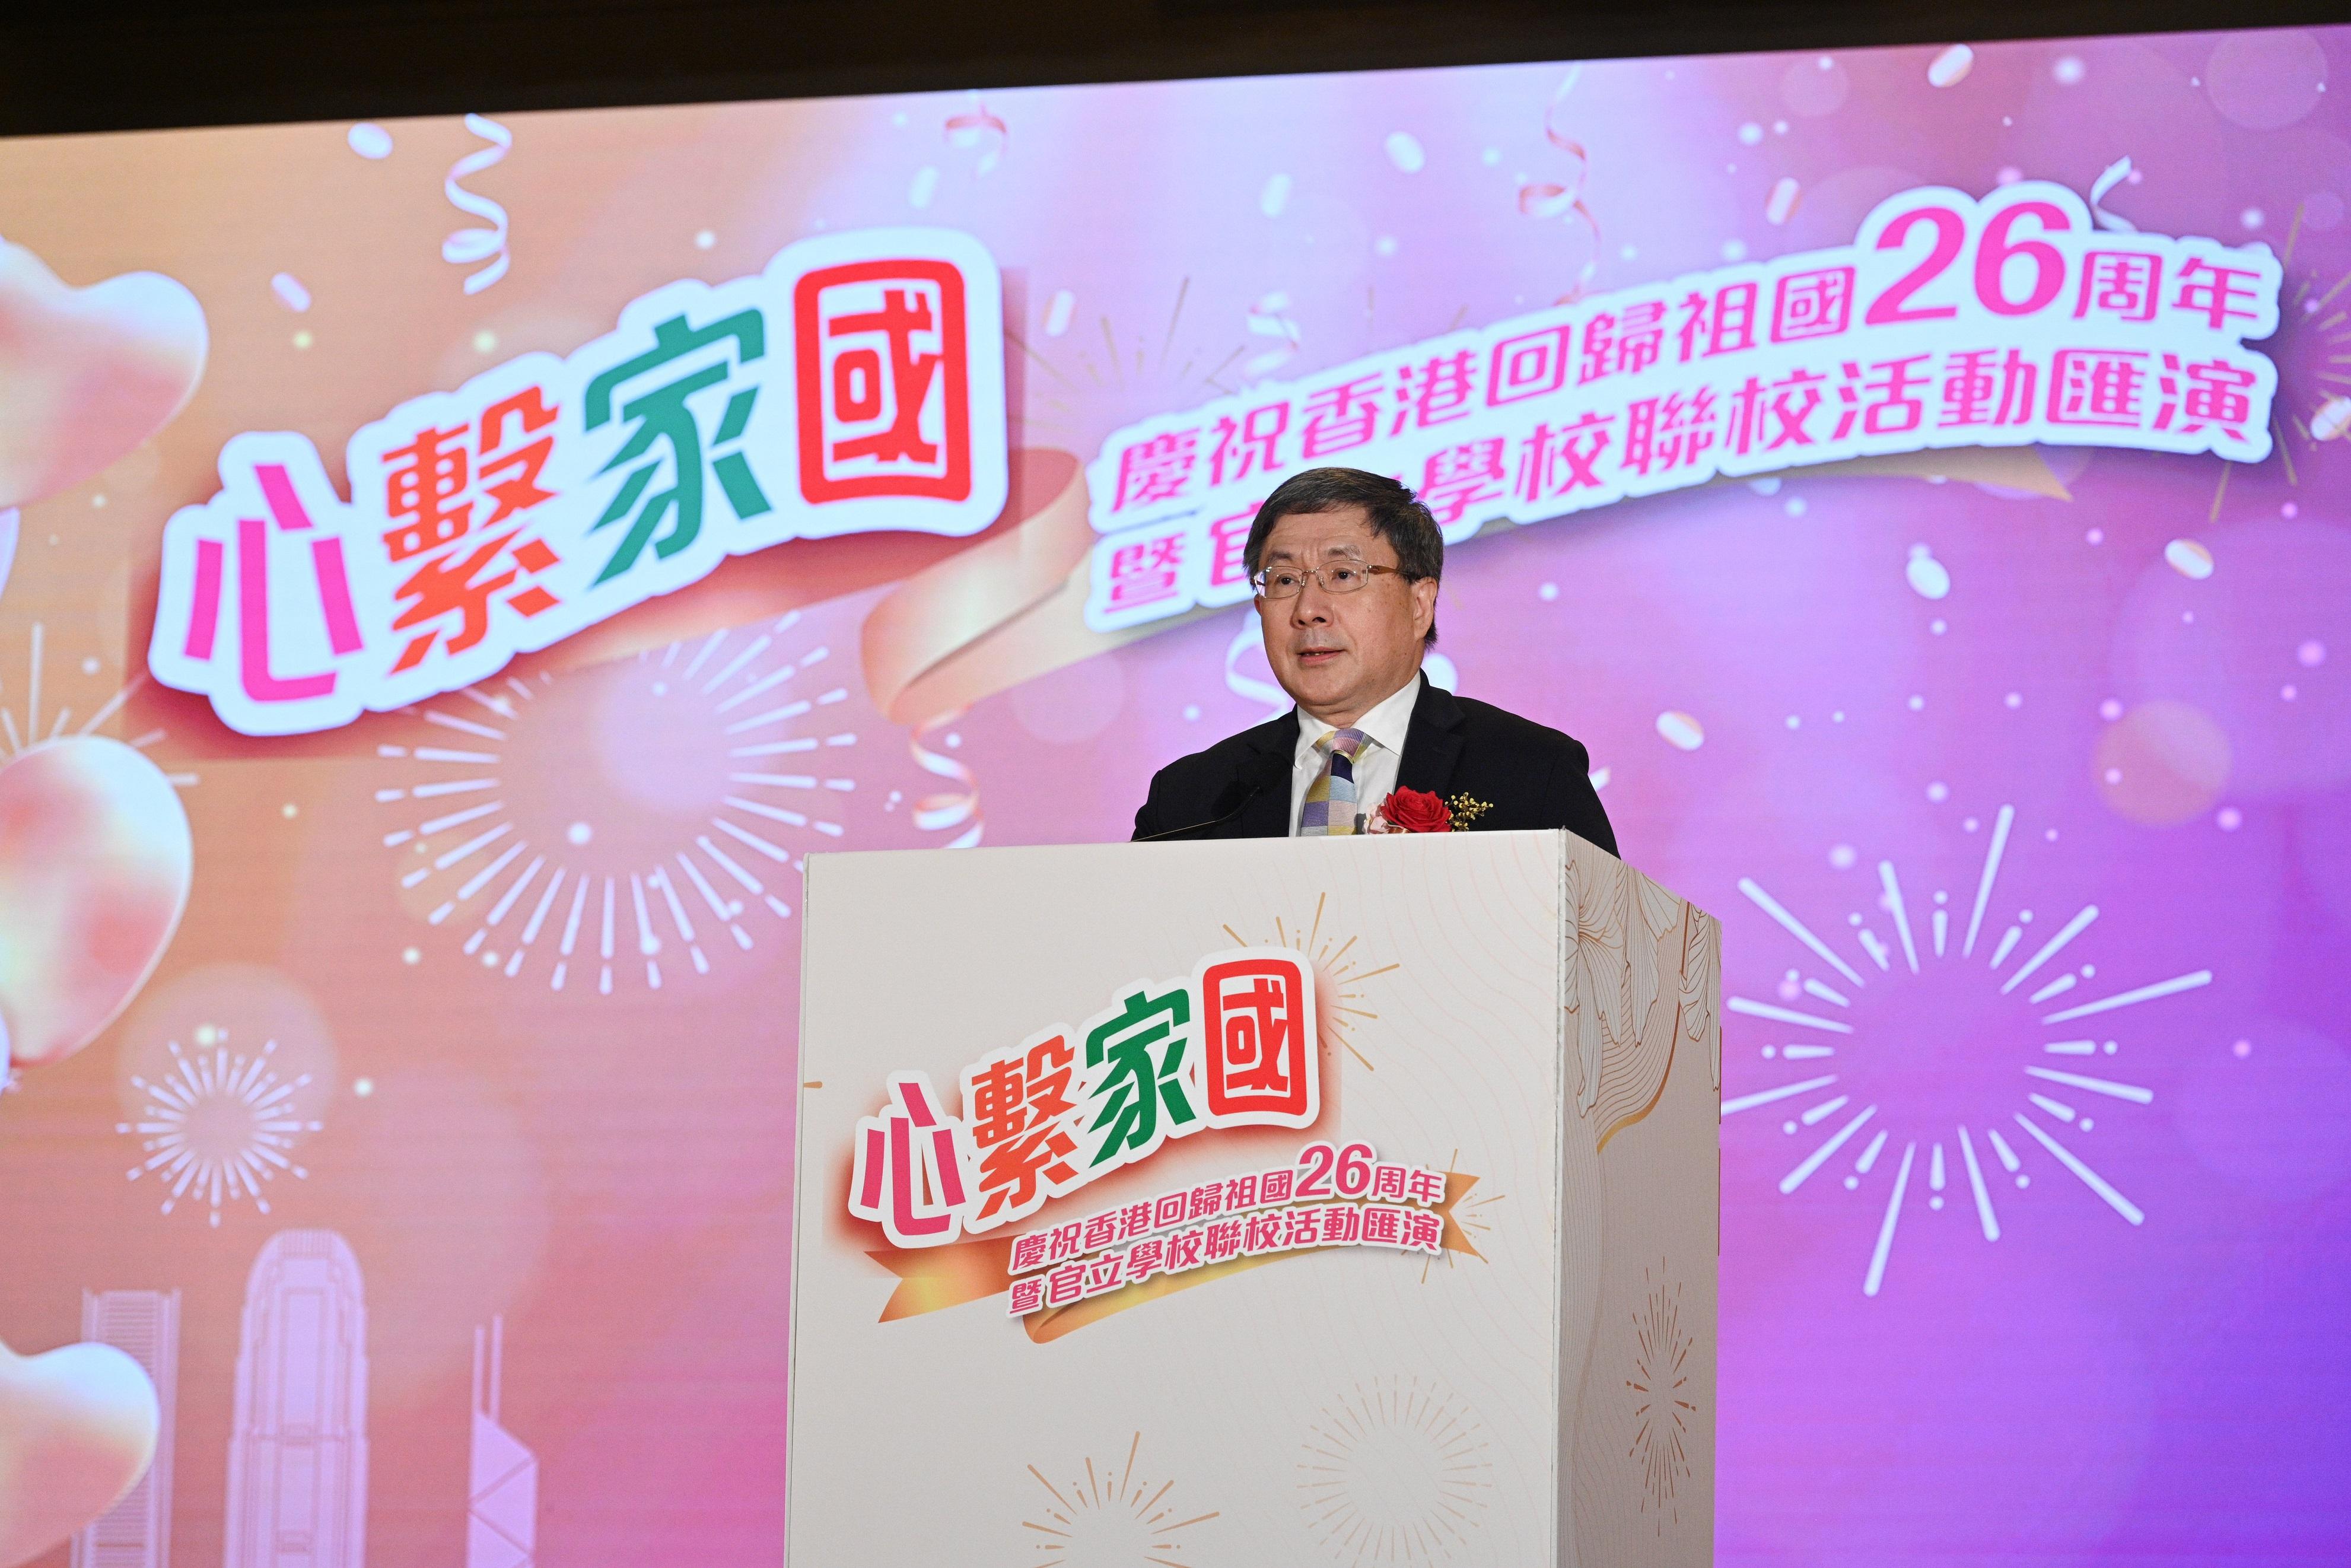 The Education Bureau today (June 30) held the "Love Our Home, Treasure Our Country" Celebration of 26th Anniversary of Hong Kong's Return to the Motherland cum Government Schools Joint School Activities Gala. Photo shows the Deputy Chief Secretary for Administration, Mr Cheuk Wing-hing, speaking at the Gala. 